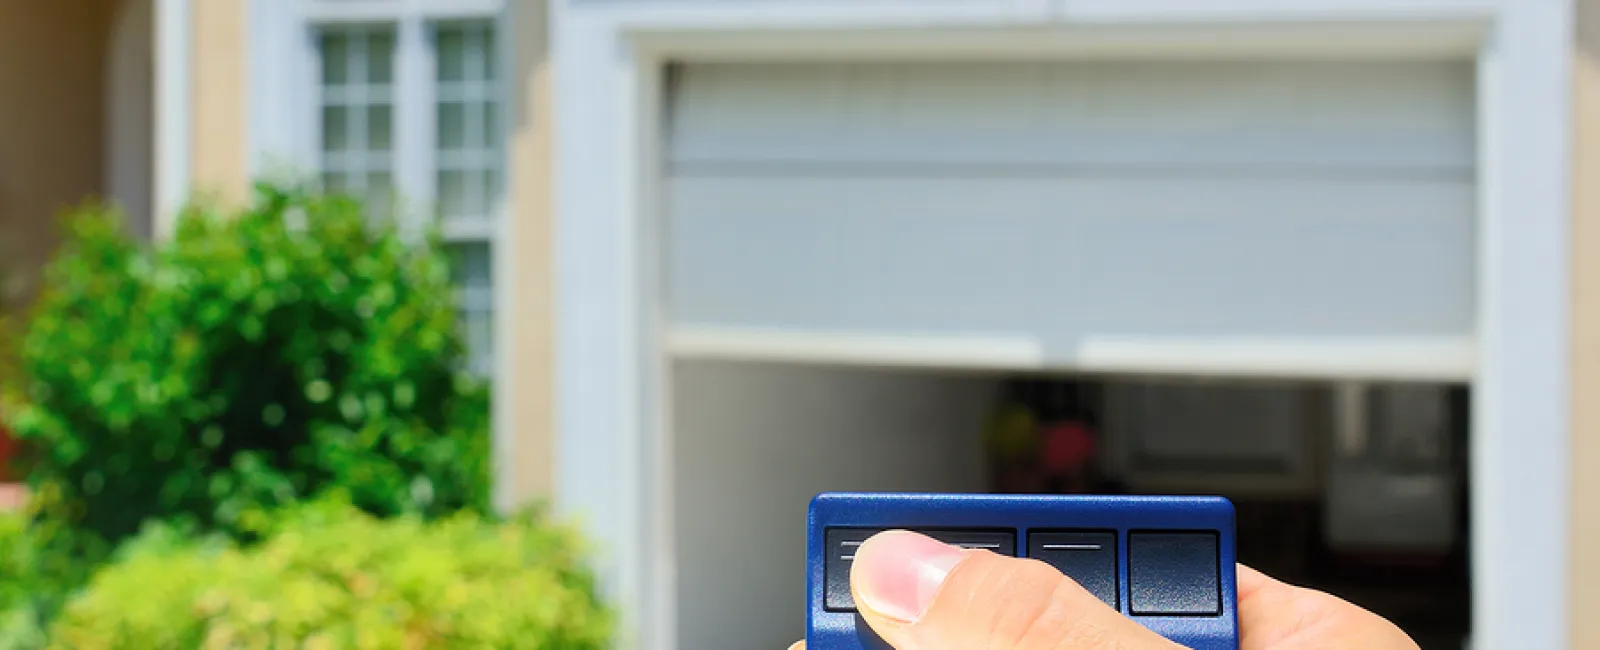 10 Benefits of Parking a Car in a Garage